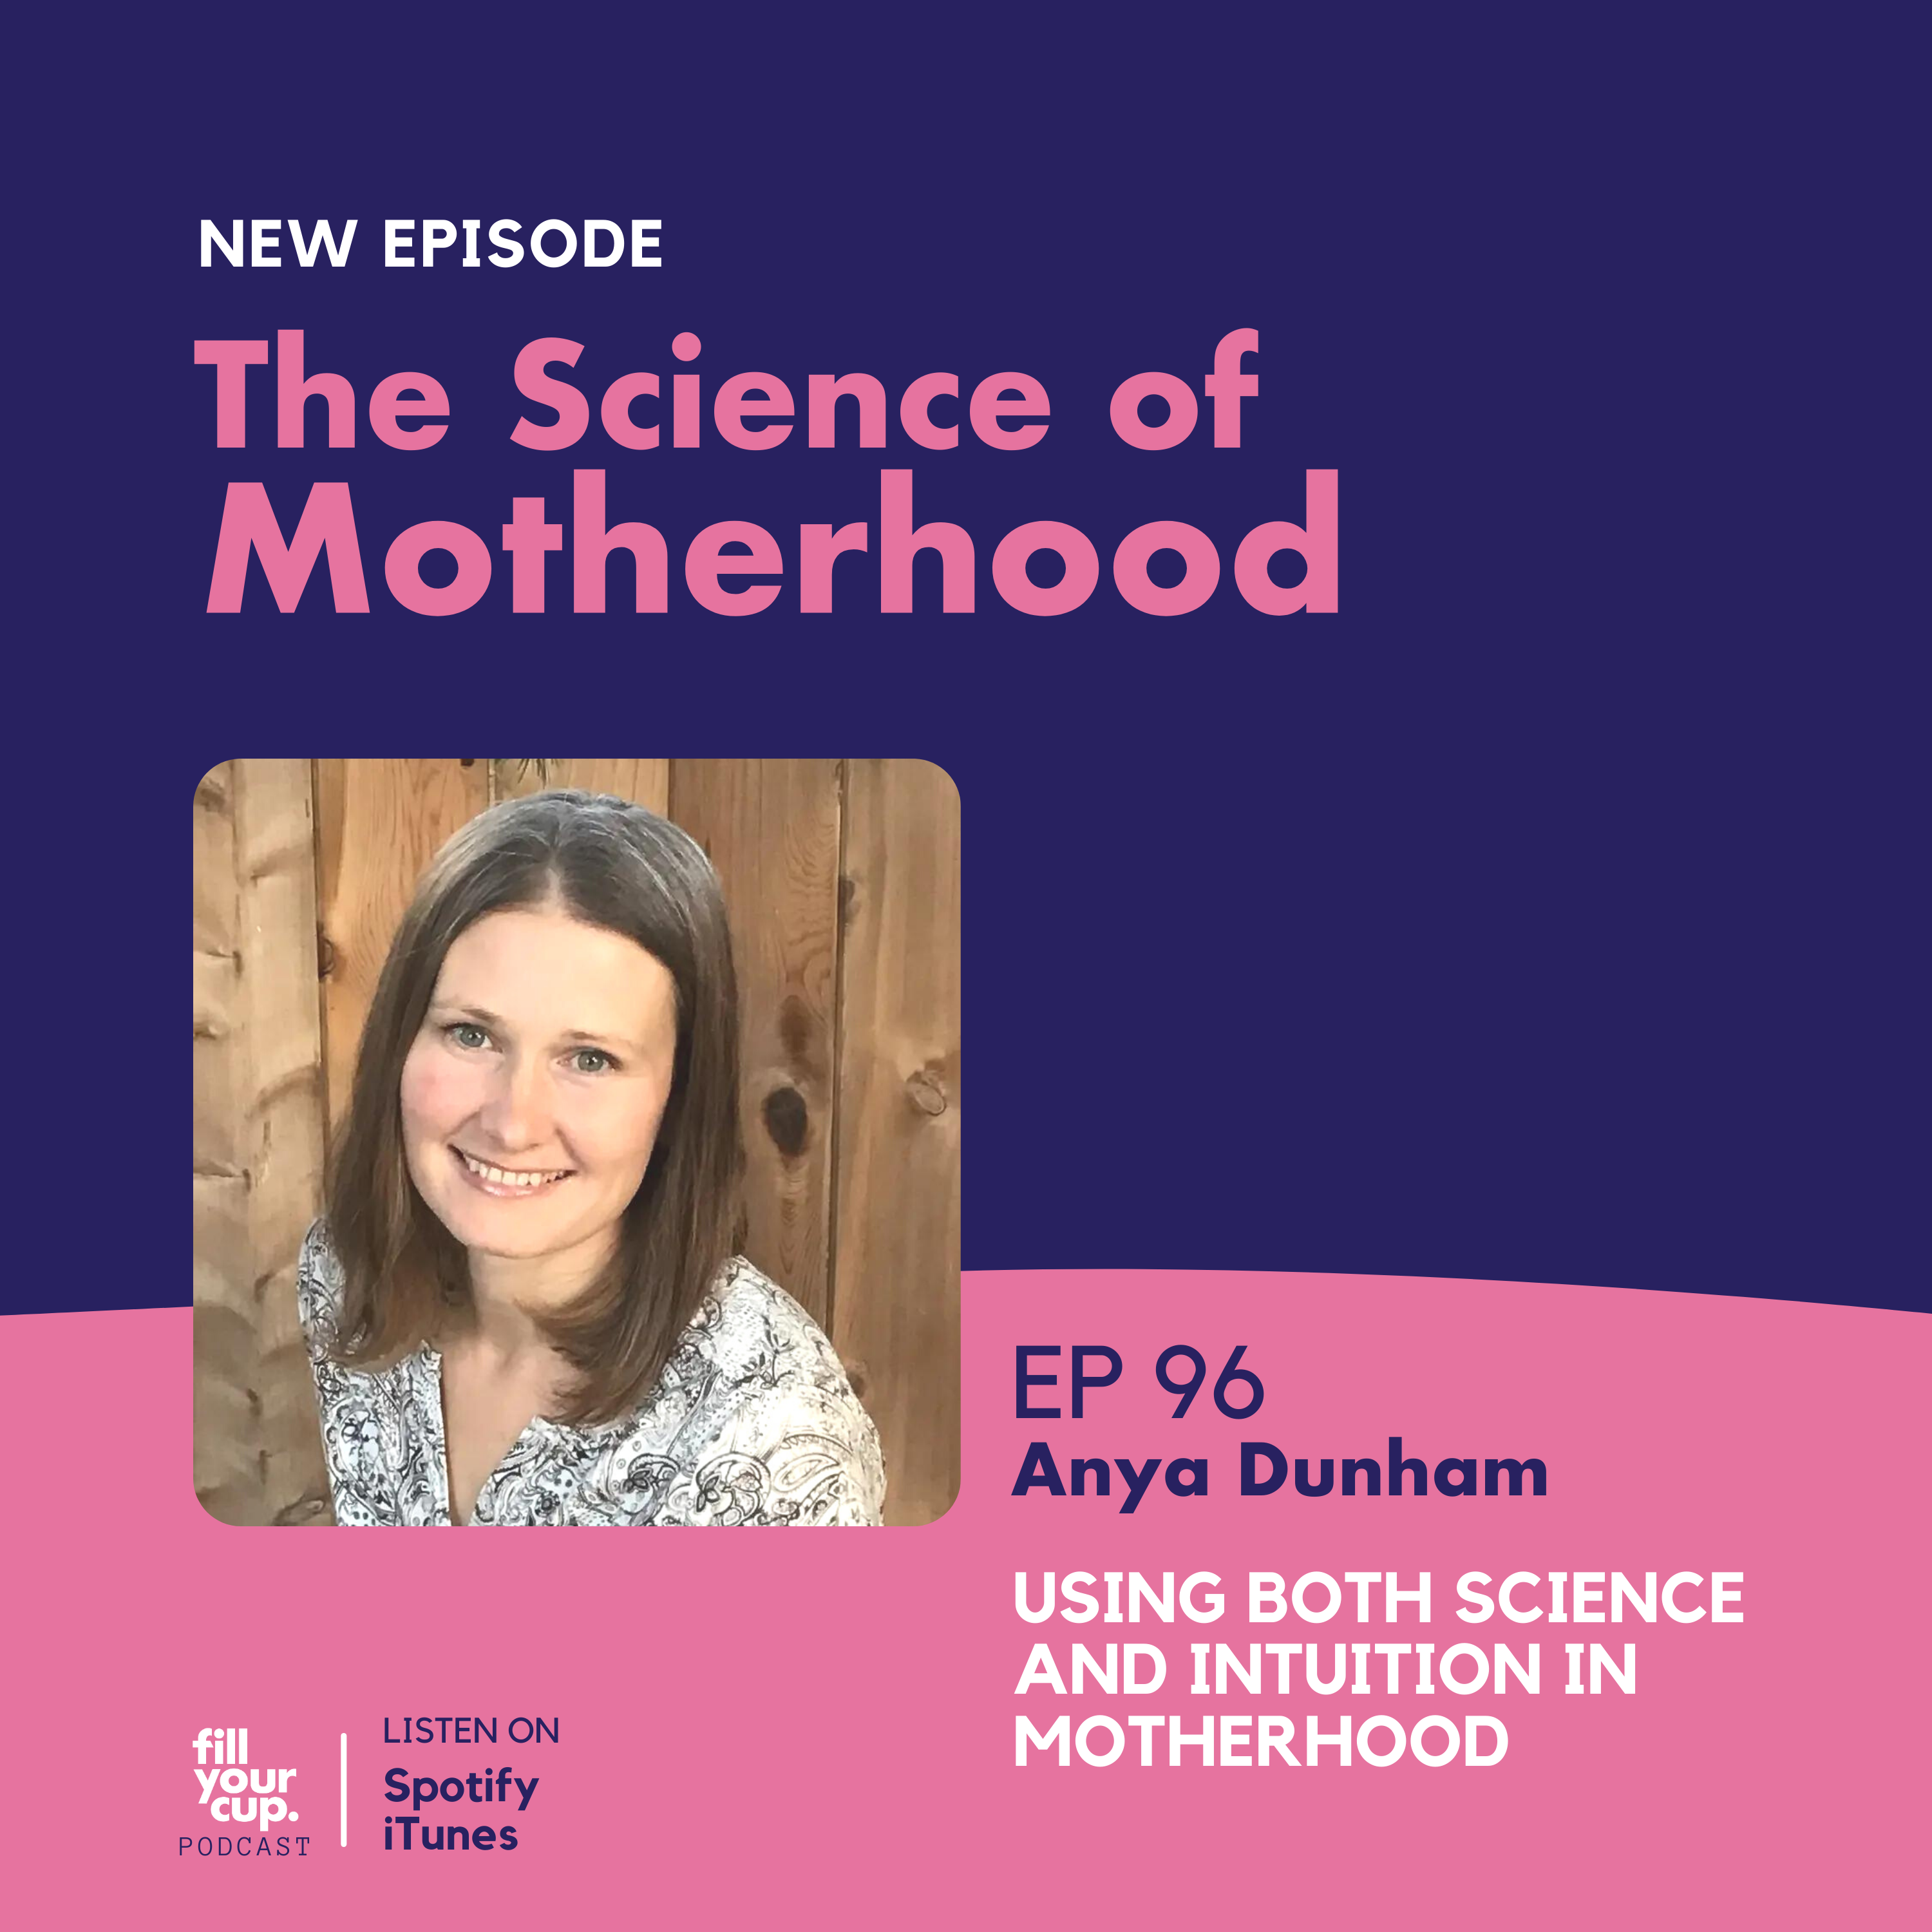 Ep 96. Anya Dunham - Using both science and intuition in motherhood